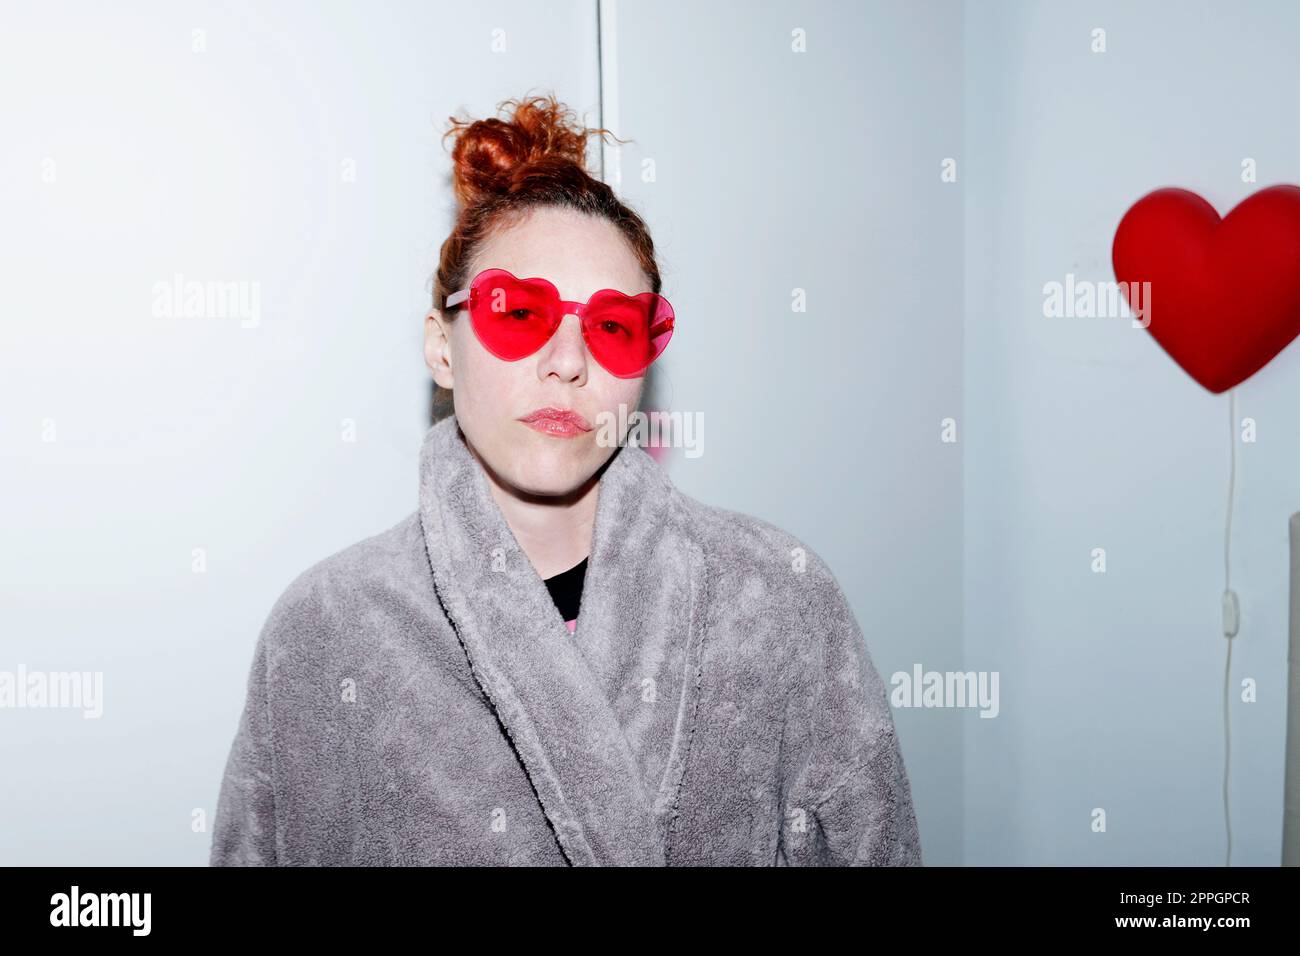 Woman with heart-shaped glasses and bathrobe in room Stock Photo